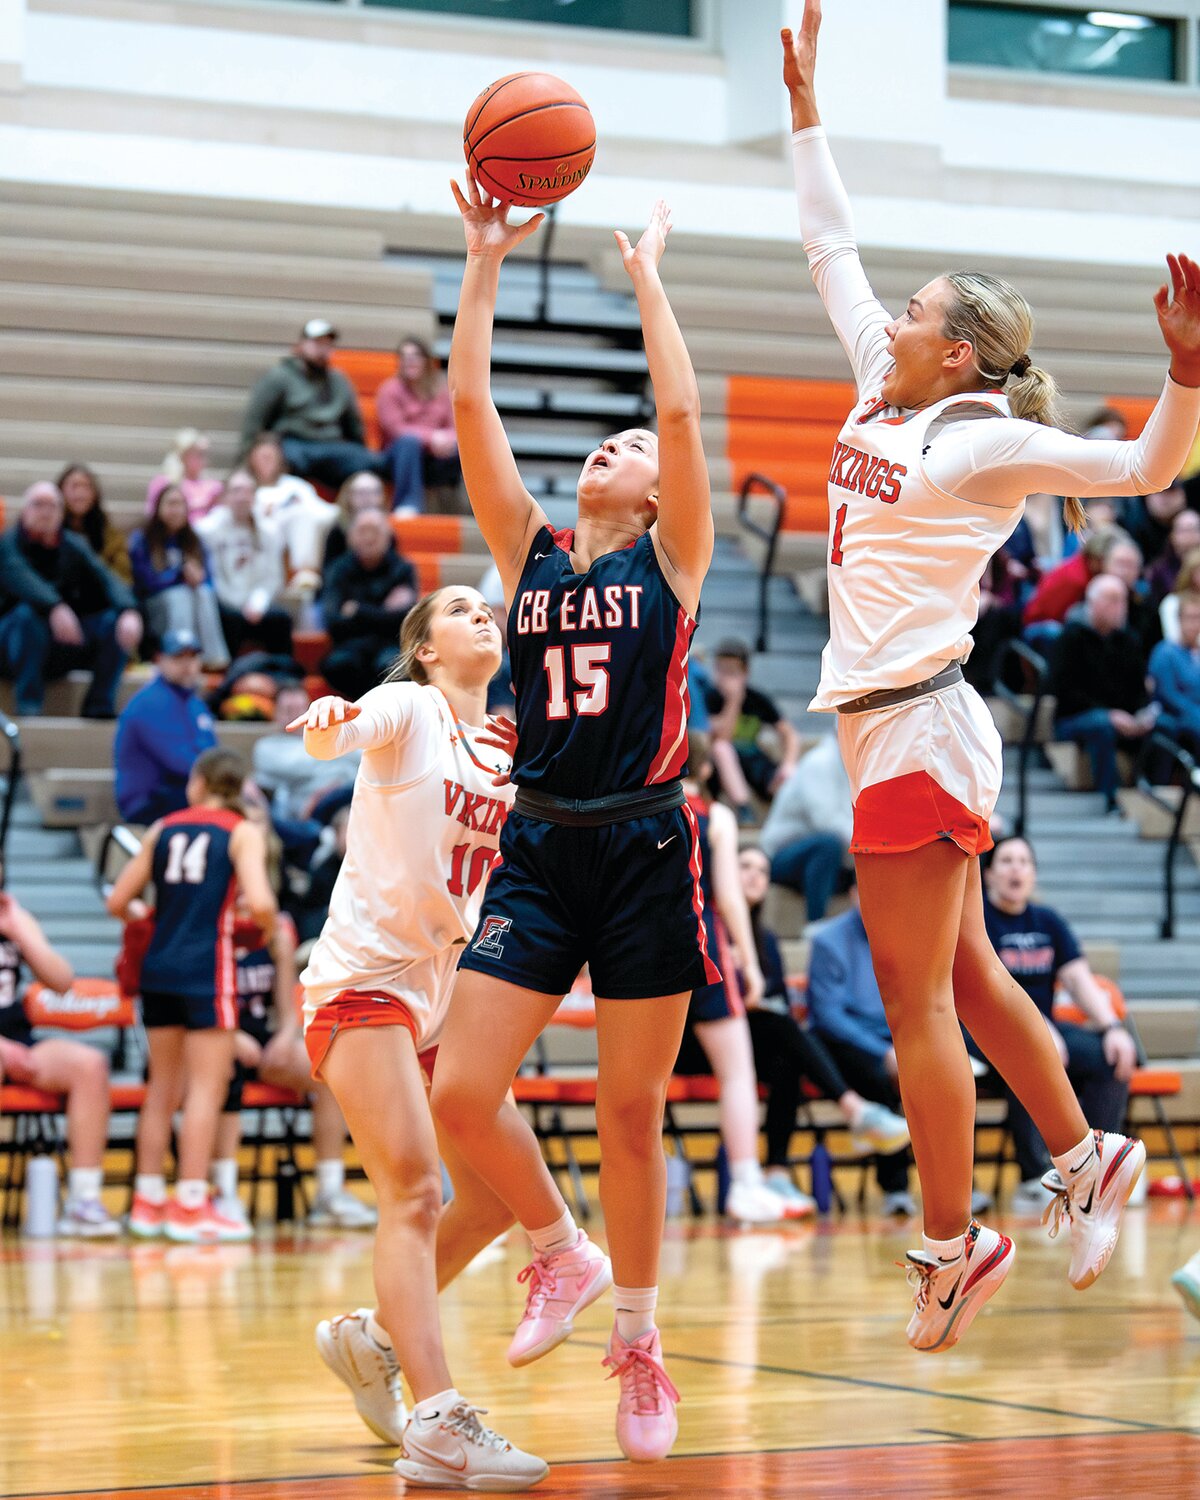 Central Bucks East’s Emma Penecale battles for a rebound against Perkiomen Valley’s Kate Nemic and Anna Stein.